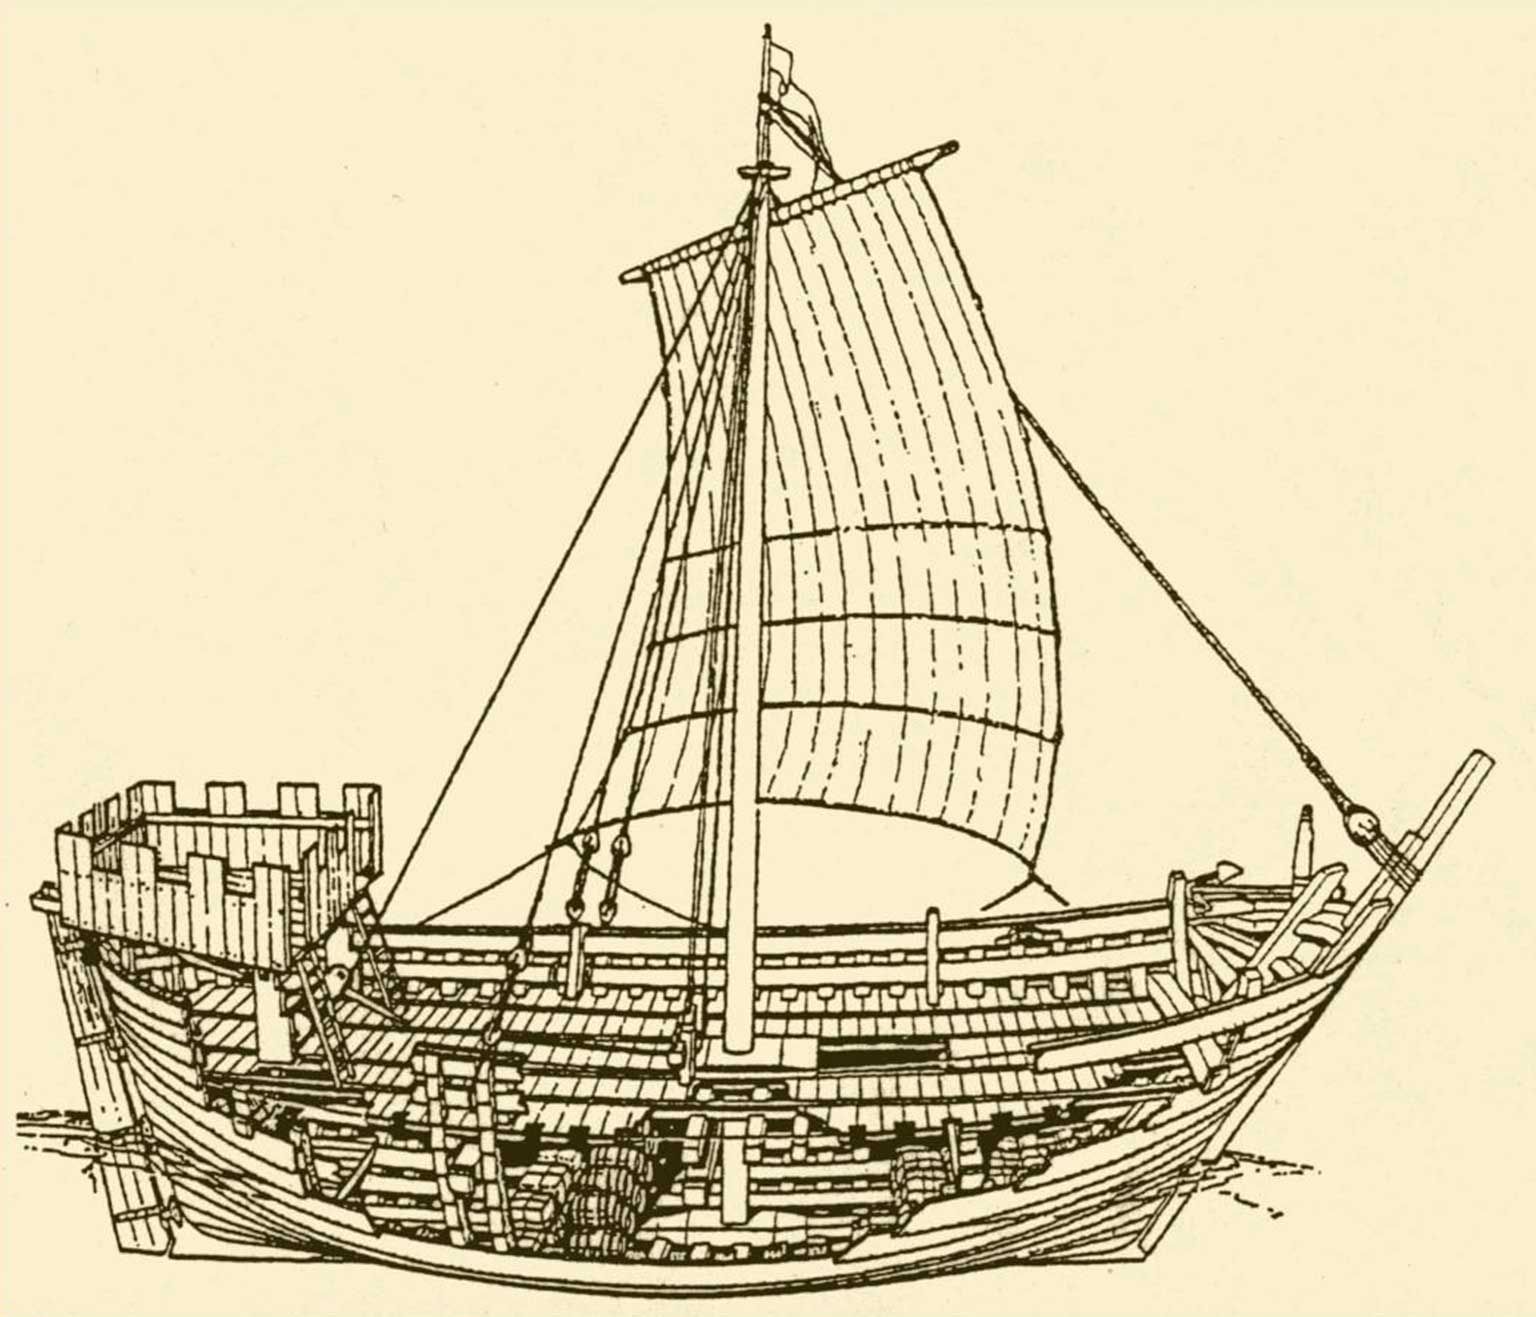 Drawing of a cog ship, showing the way it was built and the cargo area below the deck